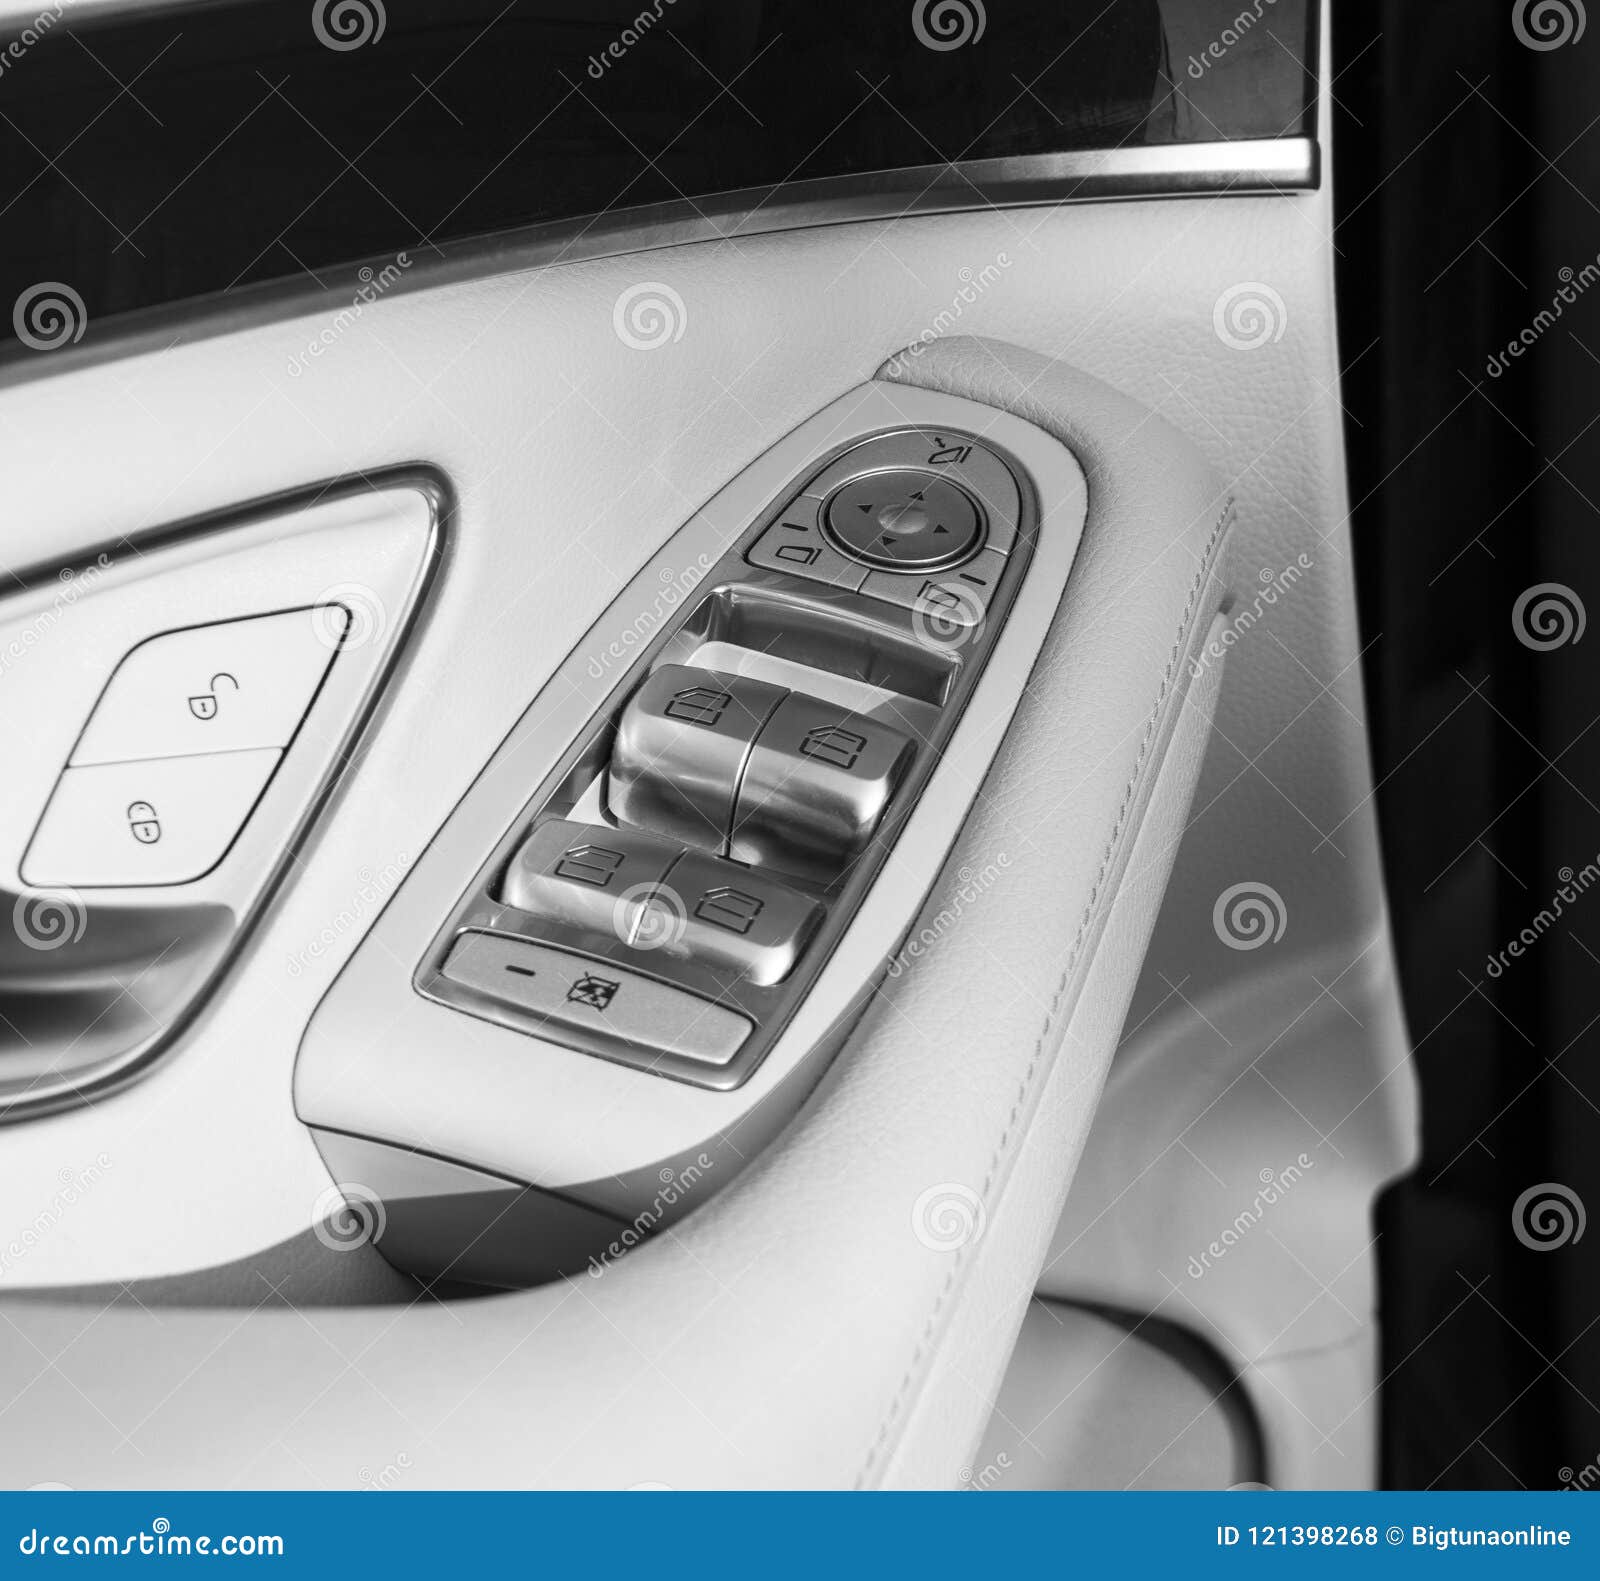 car white leather interior details of door handle with windows controls and adjustments. car window controls of modern car. car de